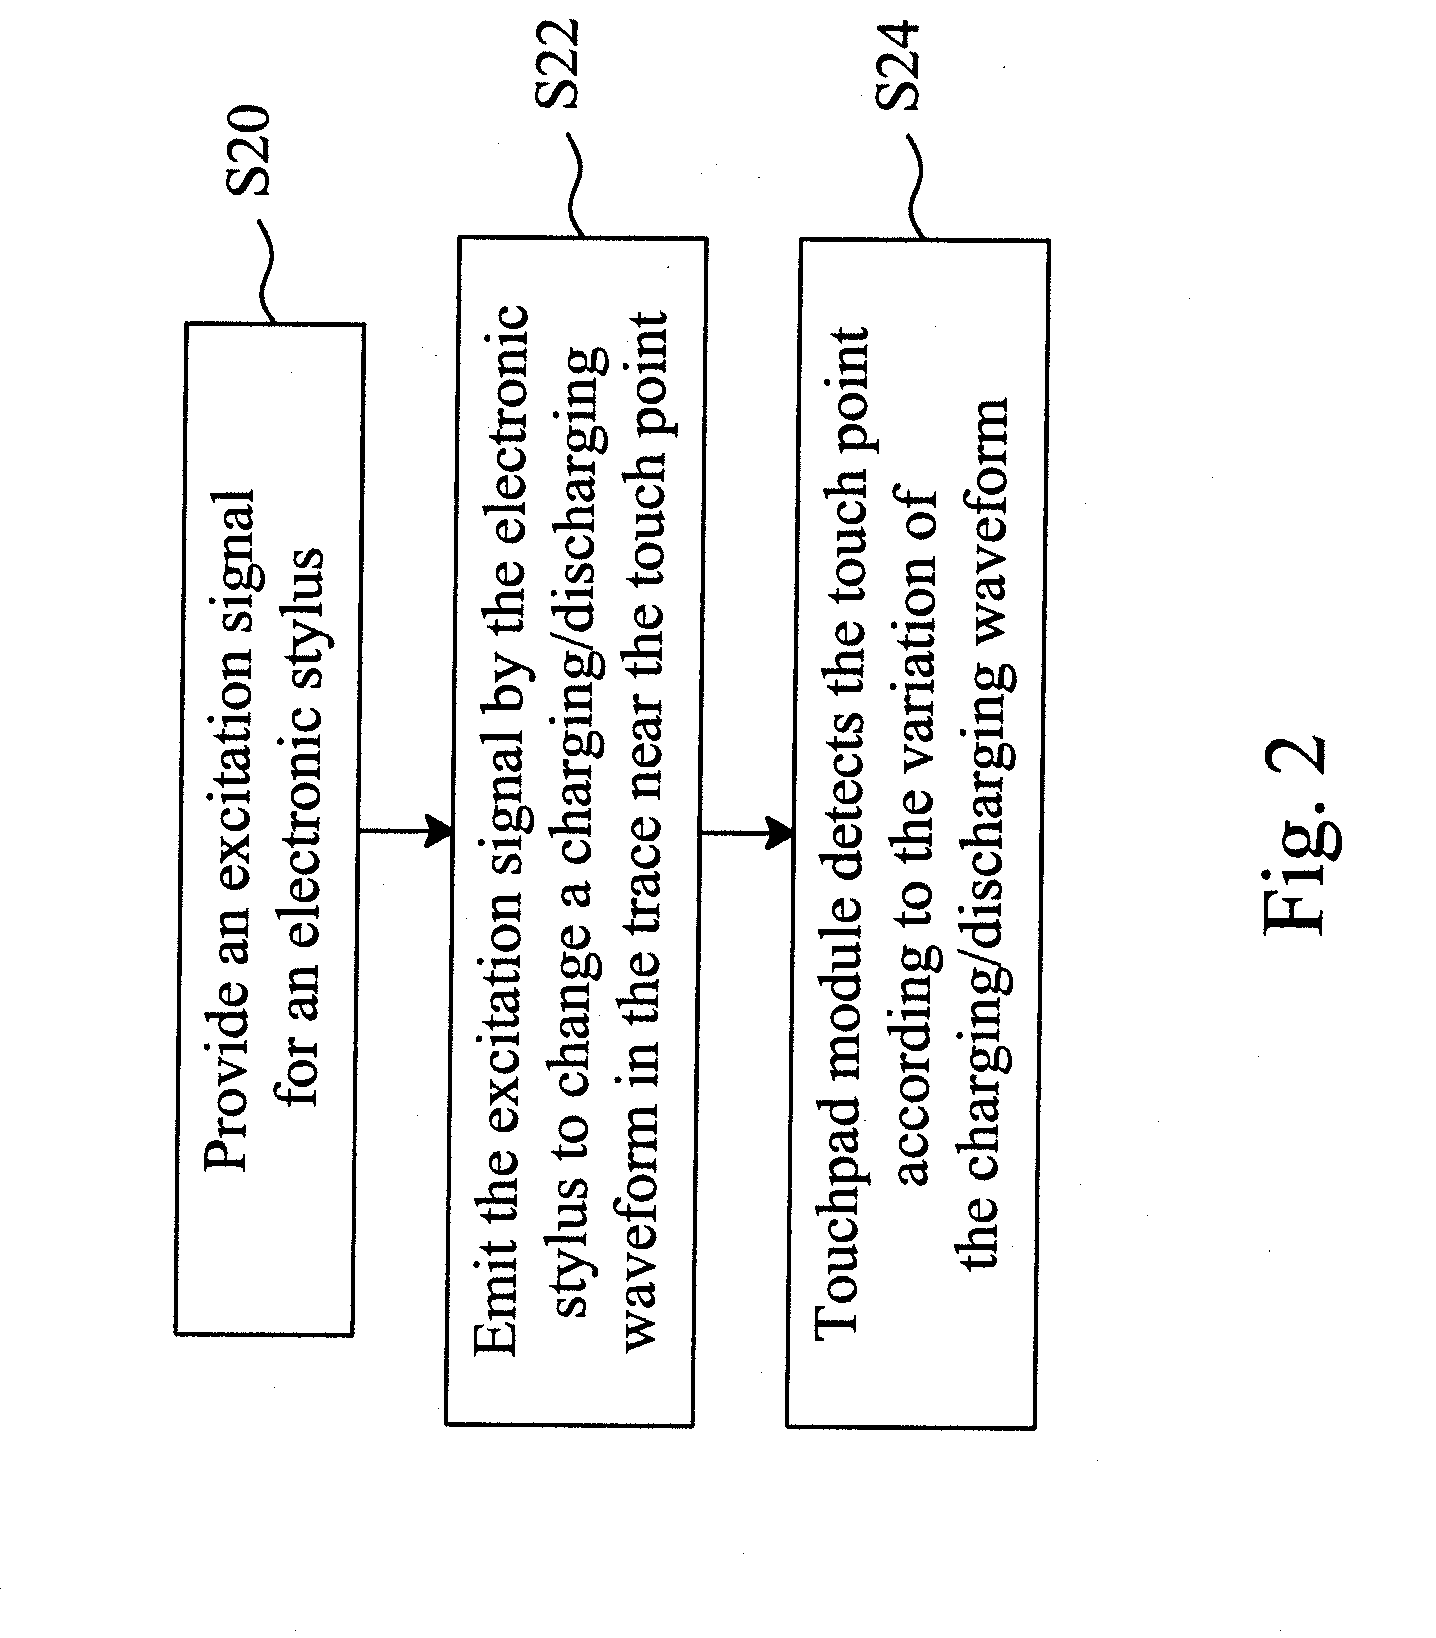 Electronic stylus, capacitive touchpad module, and apparatus for touch input